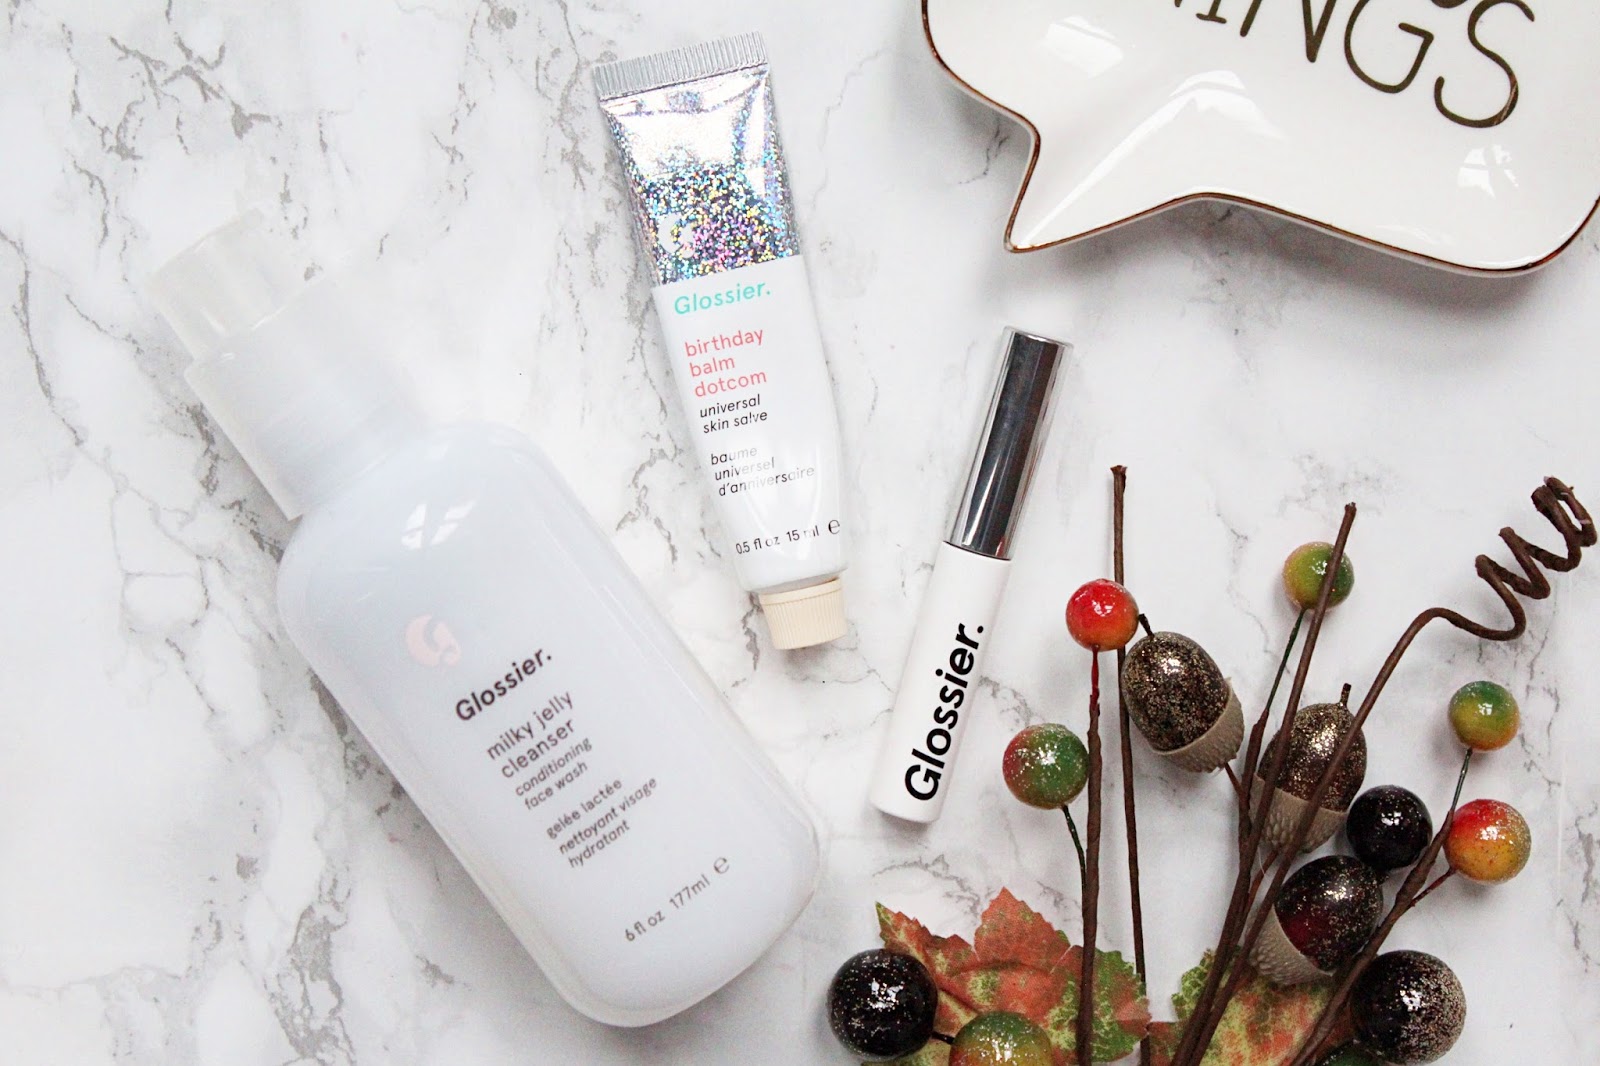 Three Favourites From Glossier